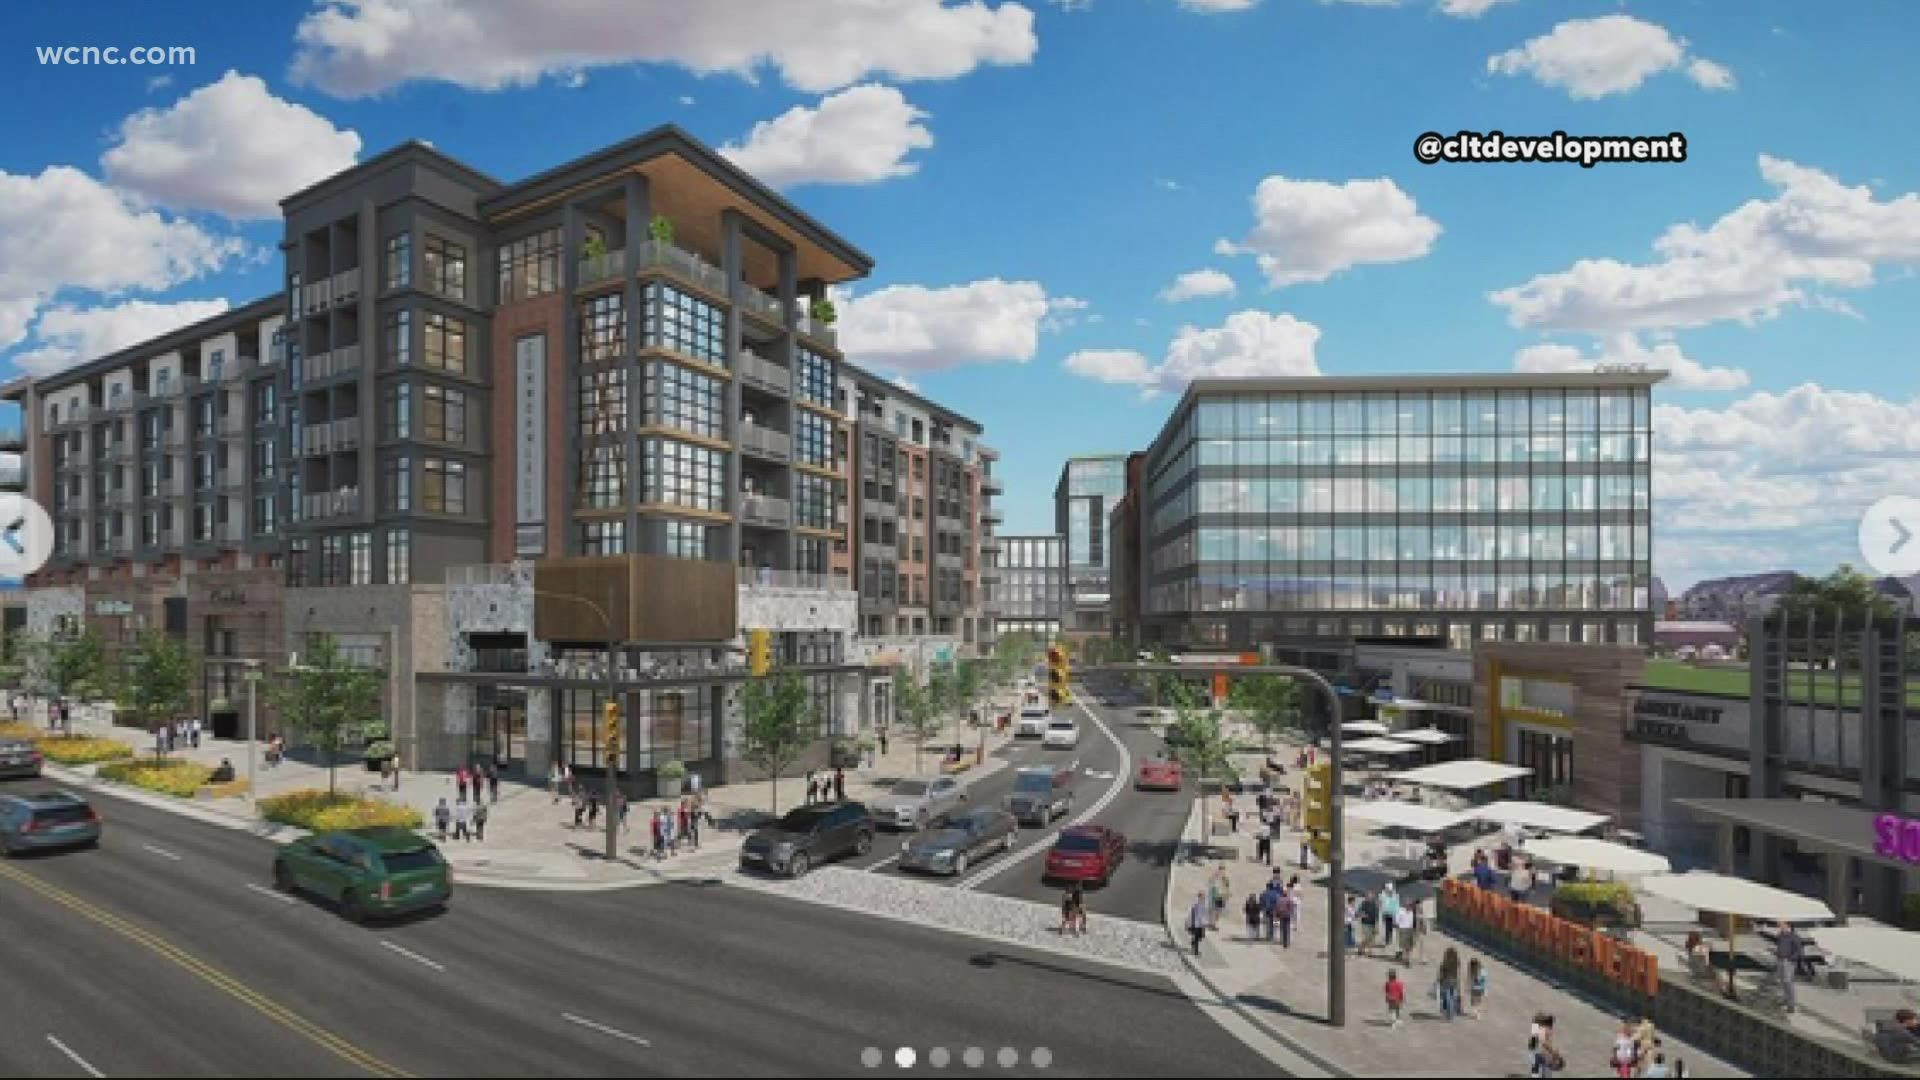 We're getting our first look at big changes coming to Plaza Midwood.